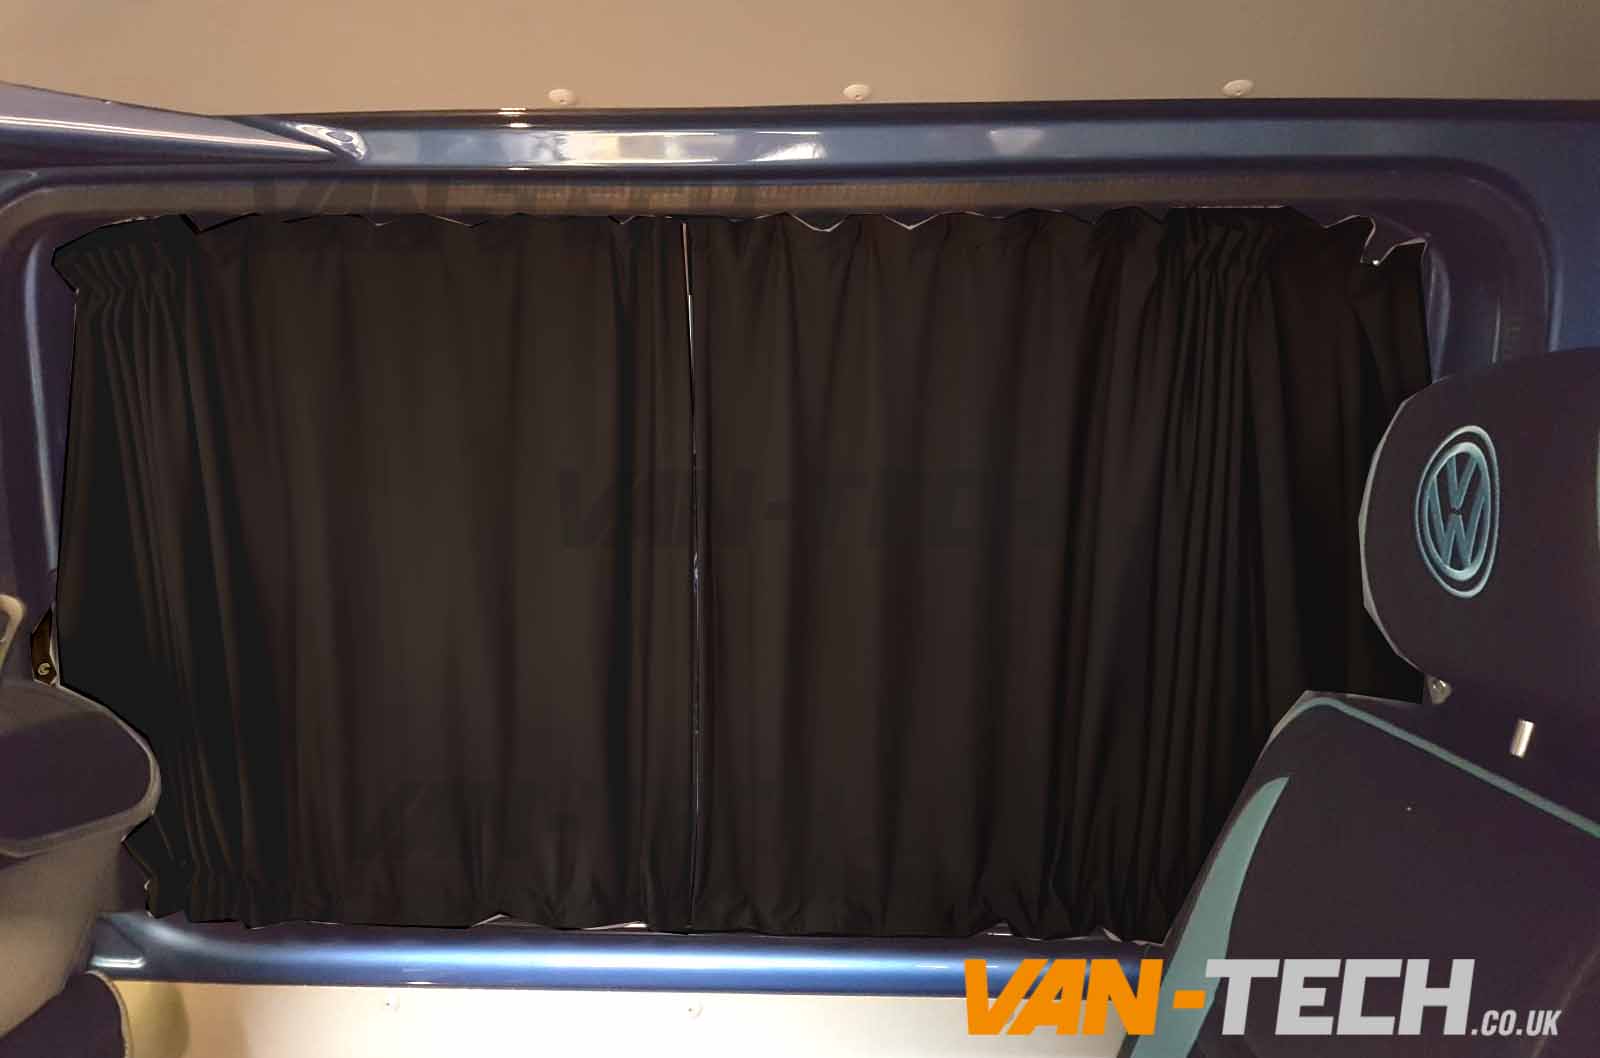 VW T5 T5.1 Blackout Interior Curtain Behind The Driver